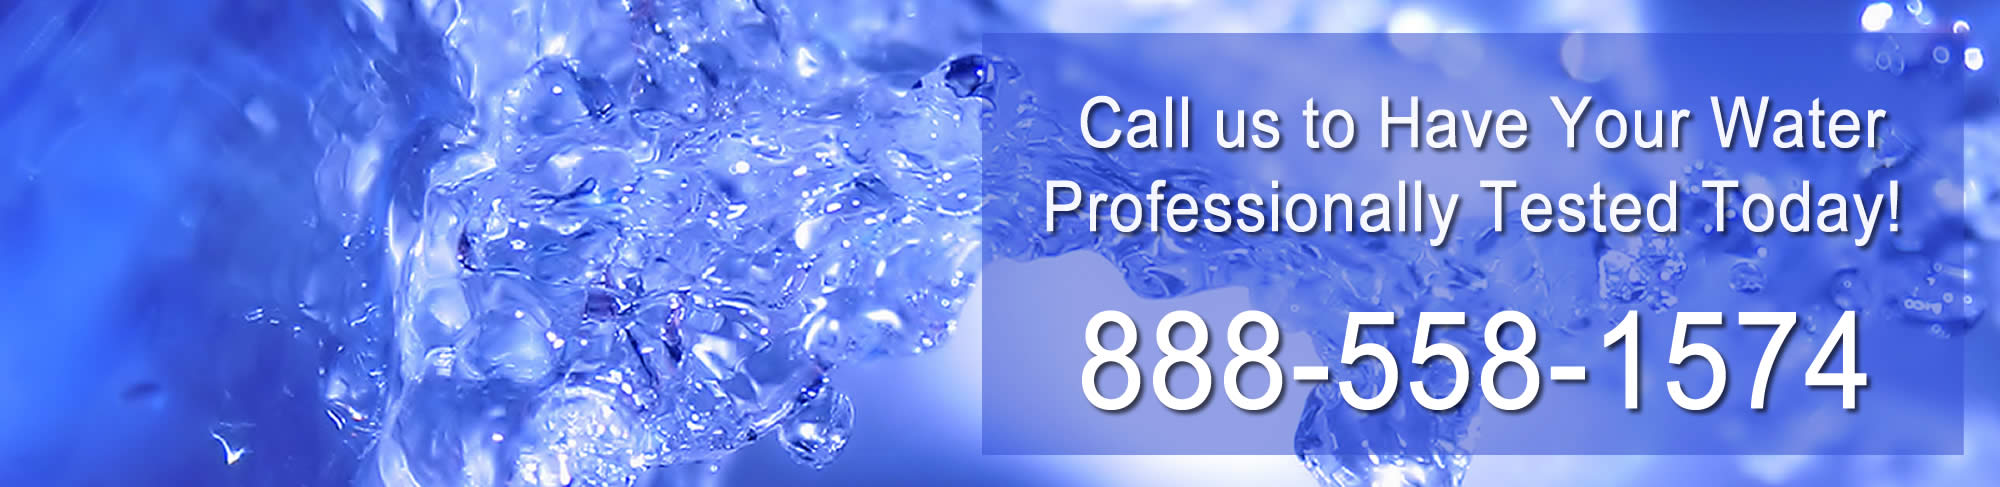 Specializing in Stonington CT Water Testing and Analysis